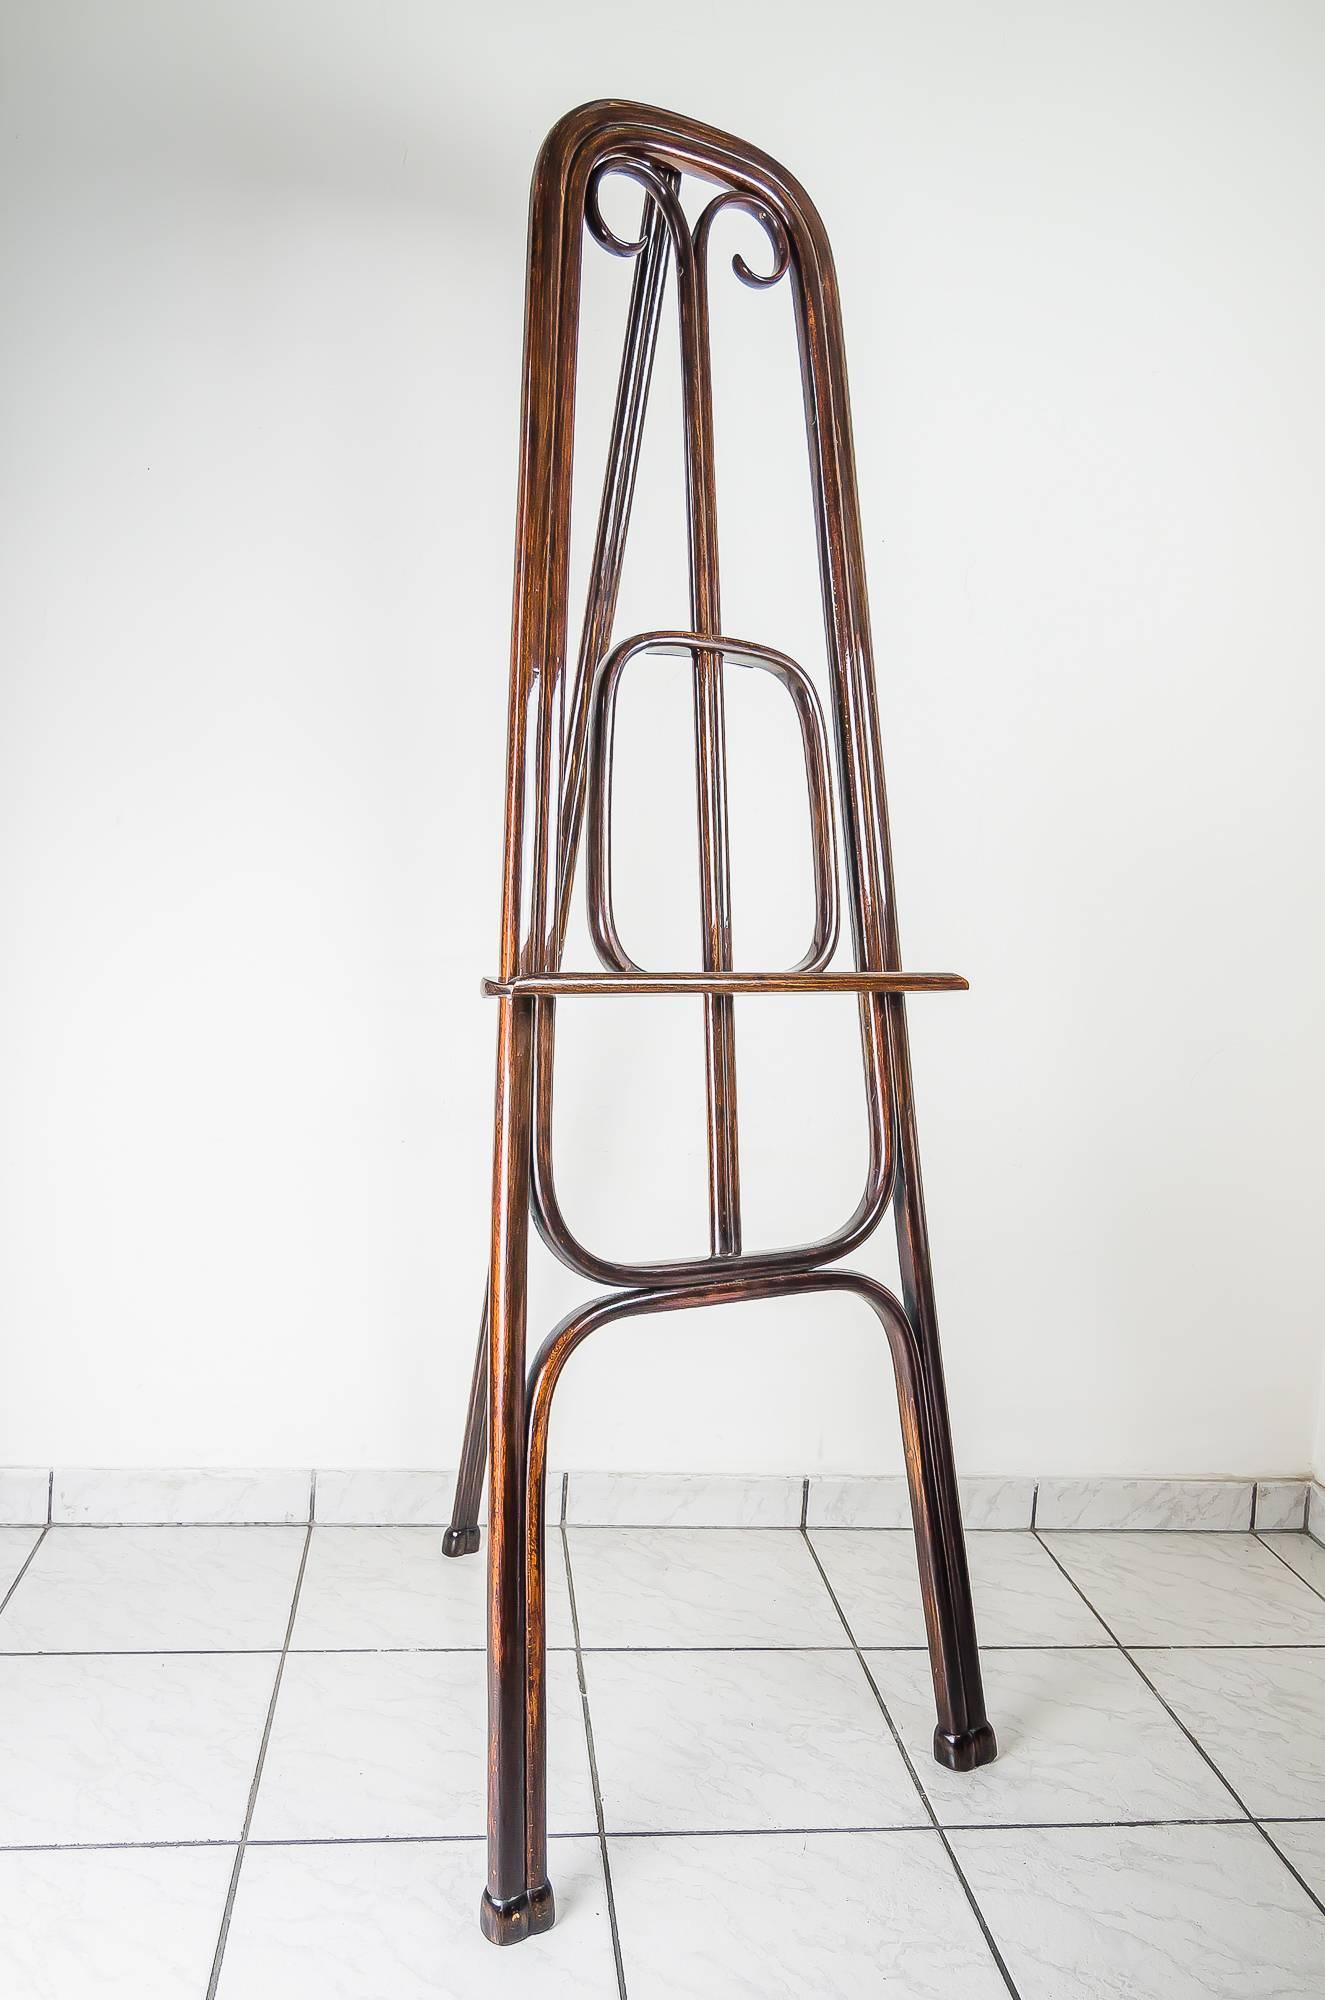 Art Nouveau easel circa 1900 beechwood polished (red / brown) by Thonet
Mod. no. 10171
Adjustable.